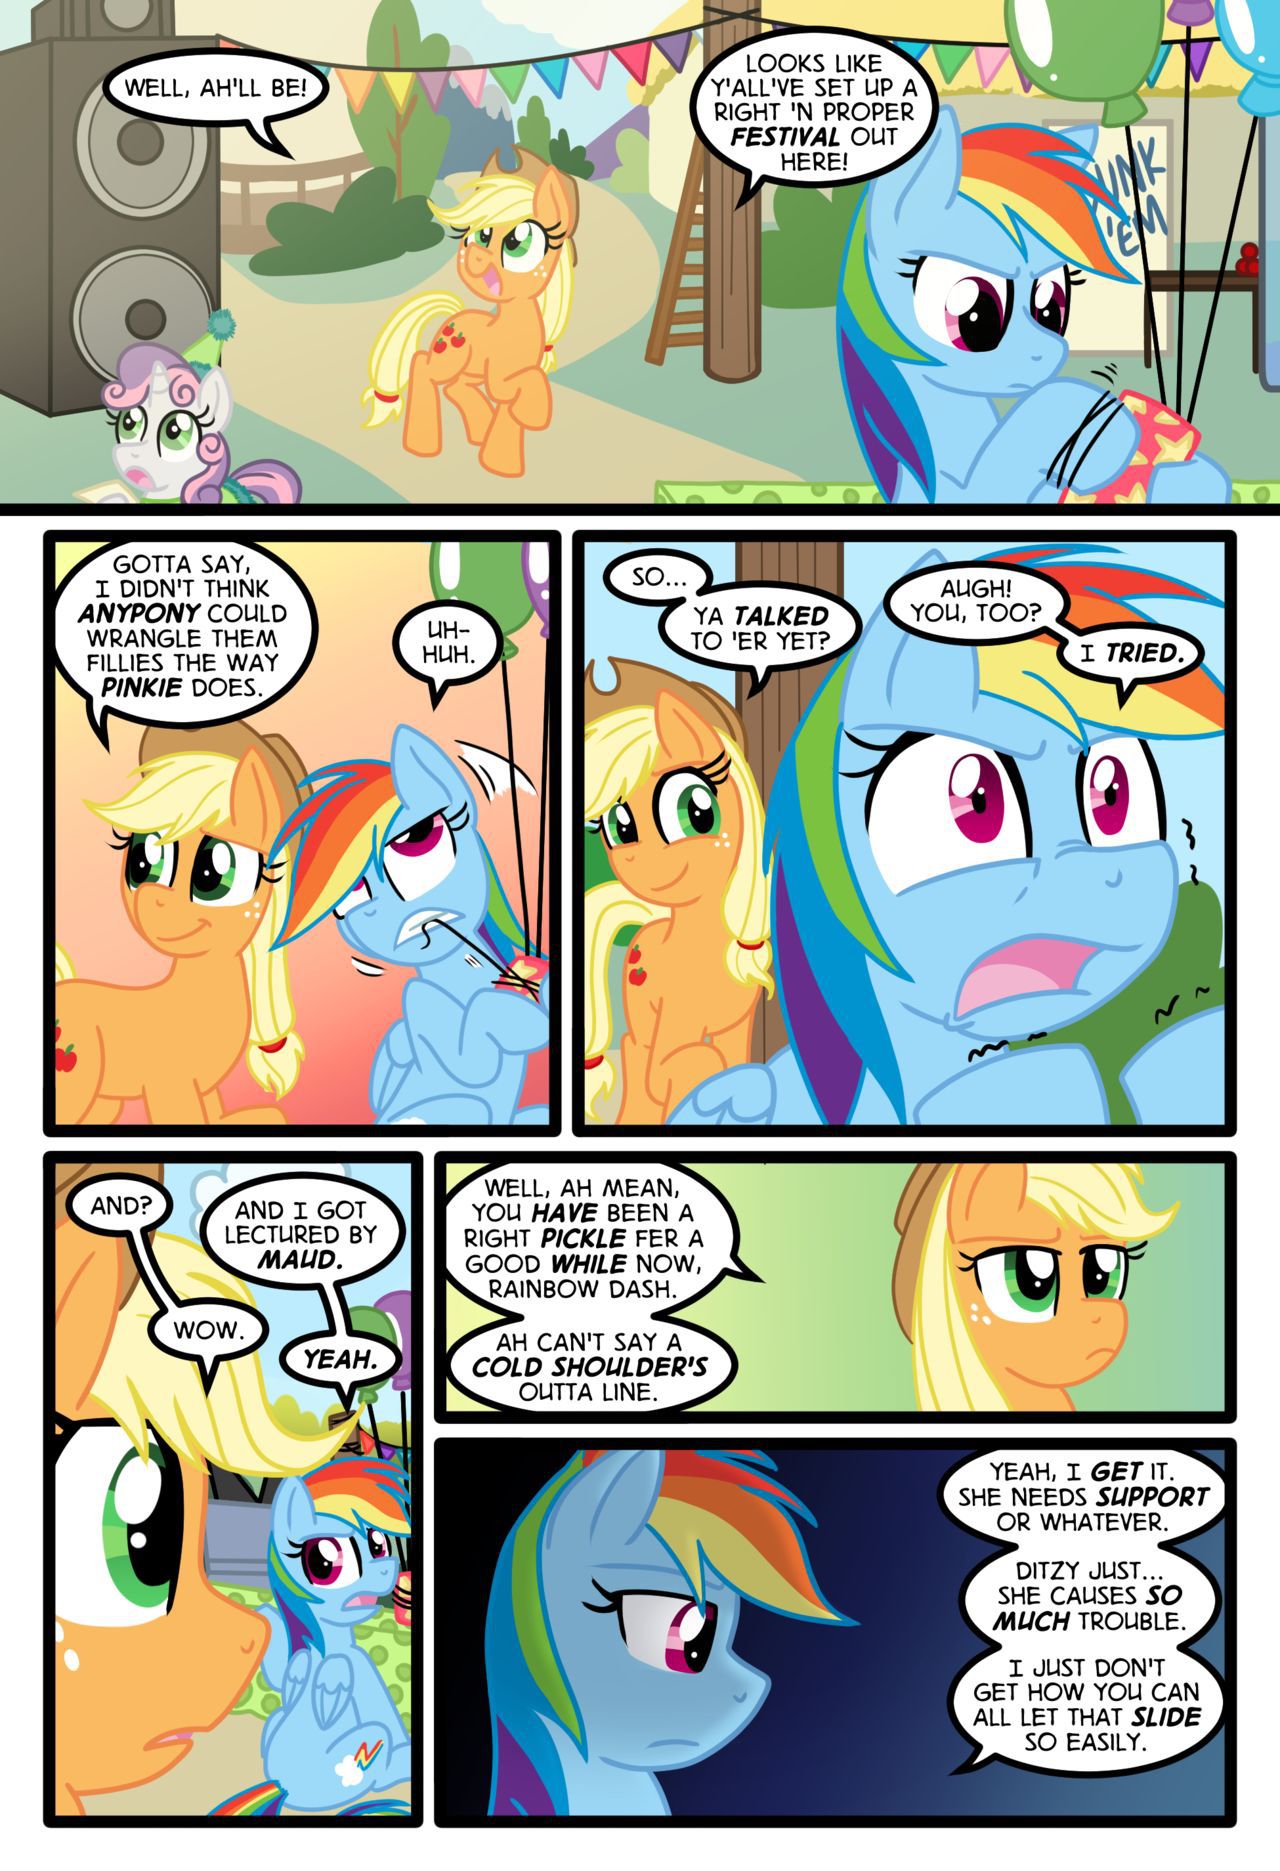 [Zaron] Lonely Hooves (My Little Pony Friendship Is Magic) [Ongoing] 80